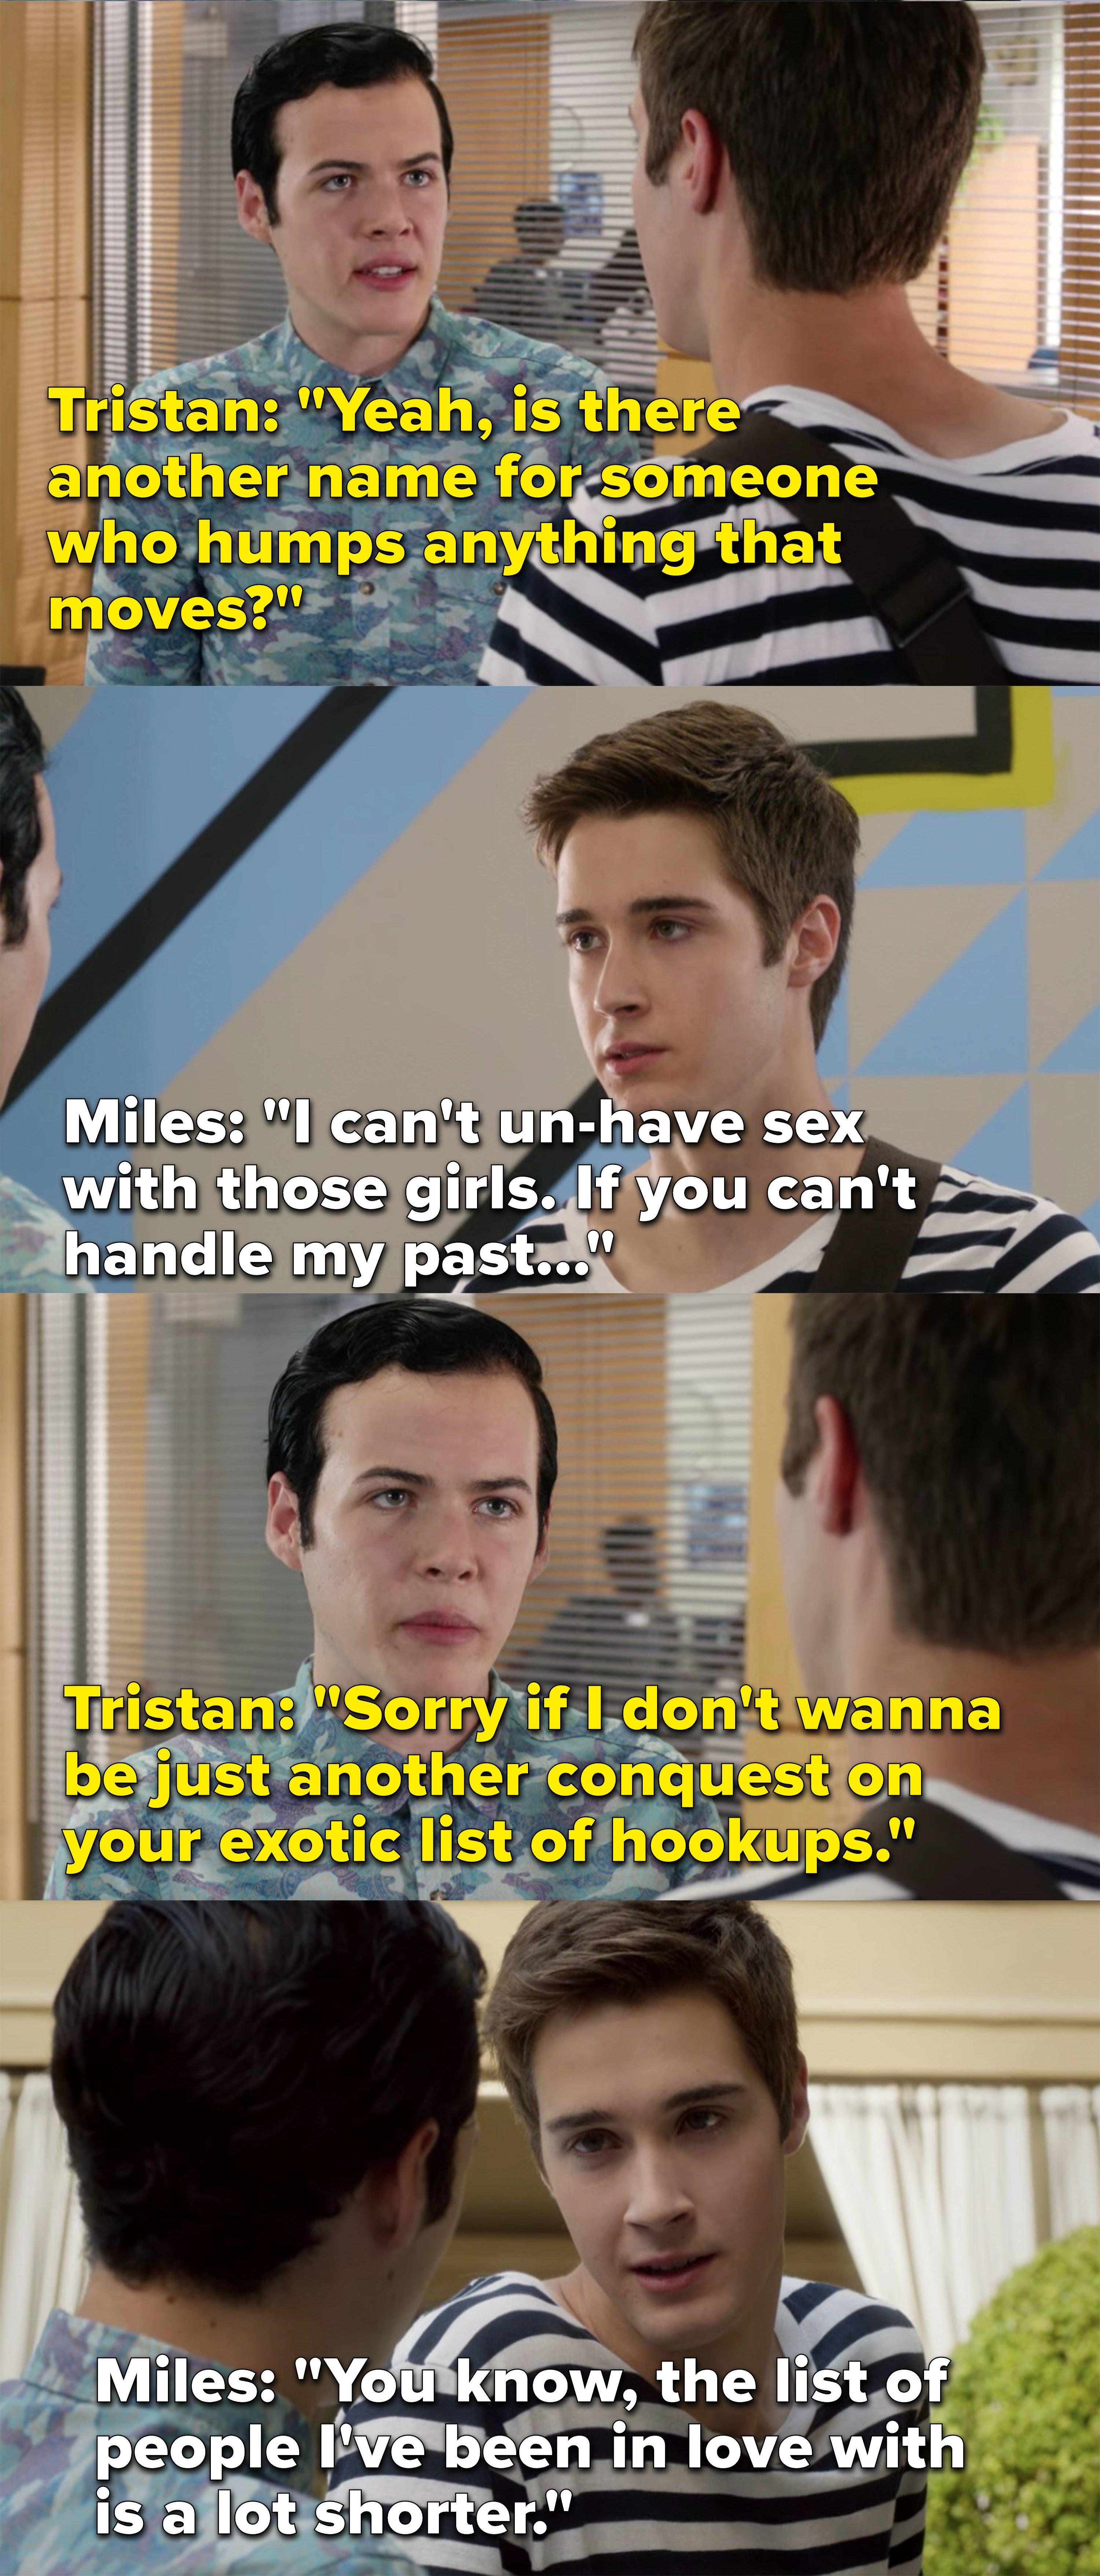 Tristan says Miles humps anything that moves and says he doesn&#x27;t want to be &quot;another conquest&quot; on Miles&#x27; list of &quot;exotic hookups,&quot; Miles tells him the list of people he&#x27;s loved is shorter